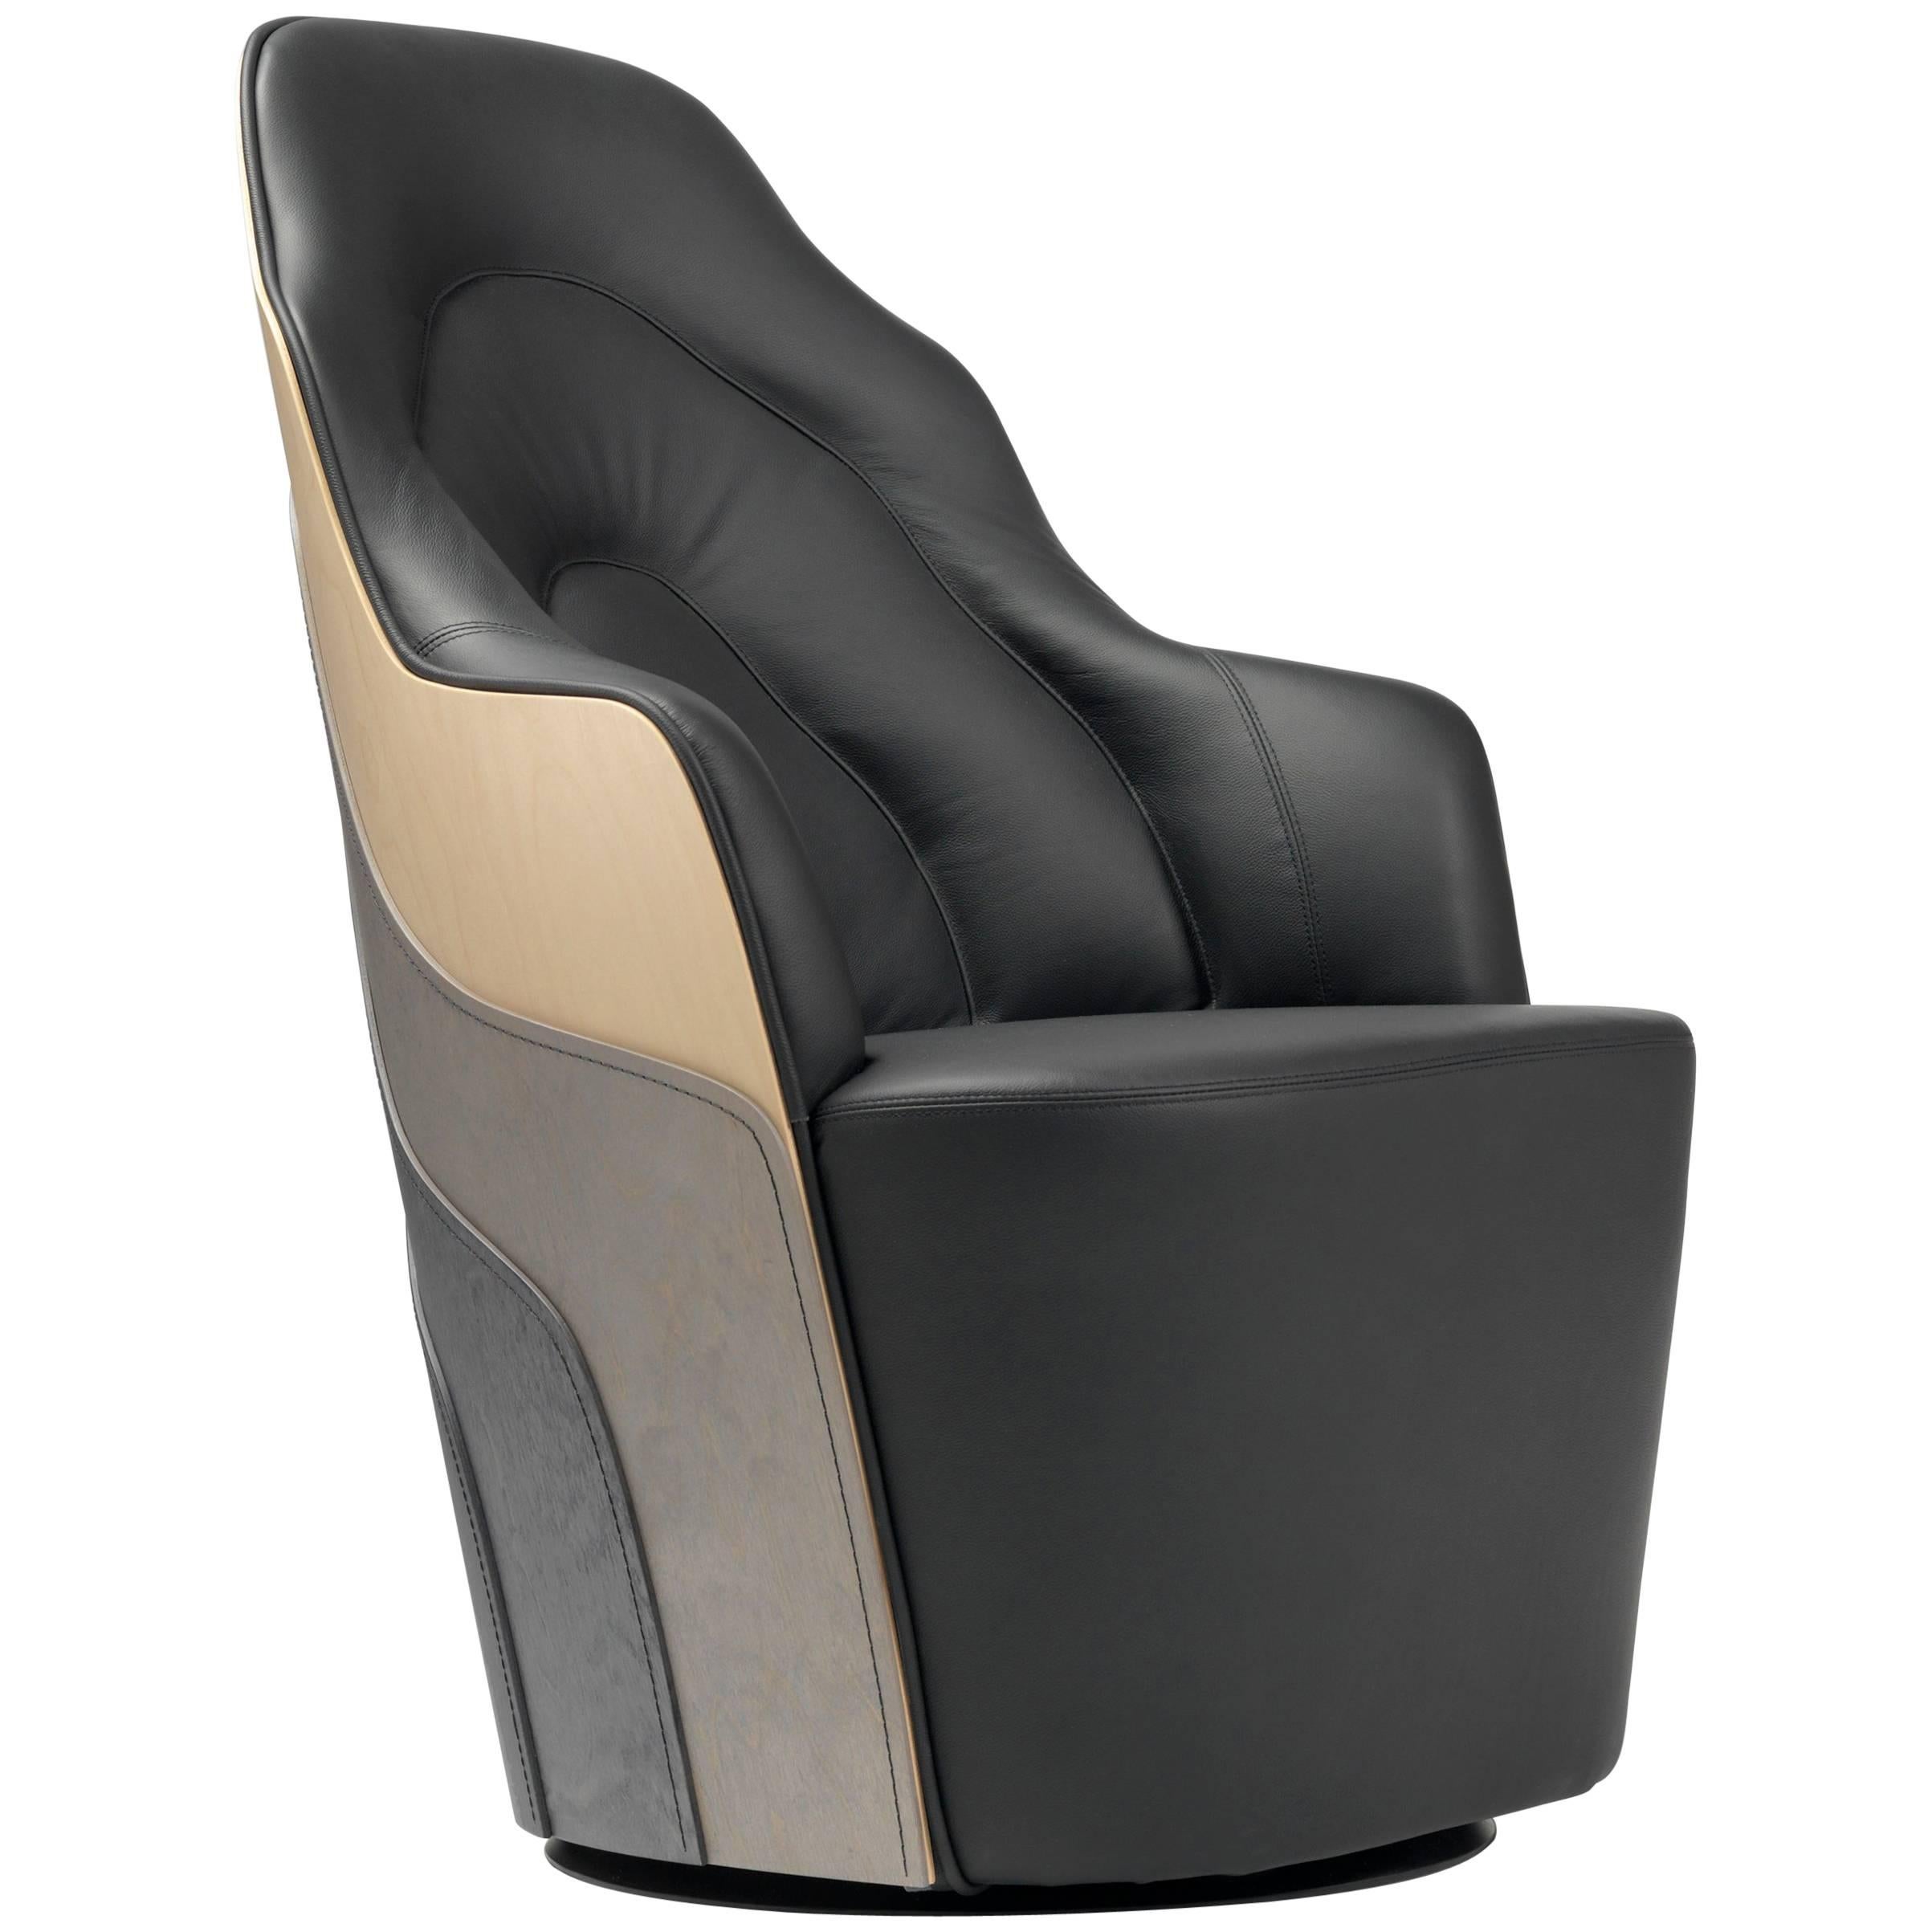  Couture Armchair Degraded Birch Backrest With Black Leather  Upholstered  For Sale